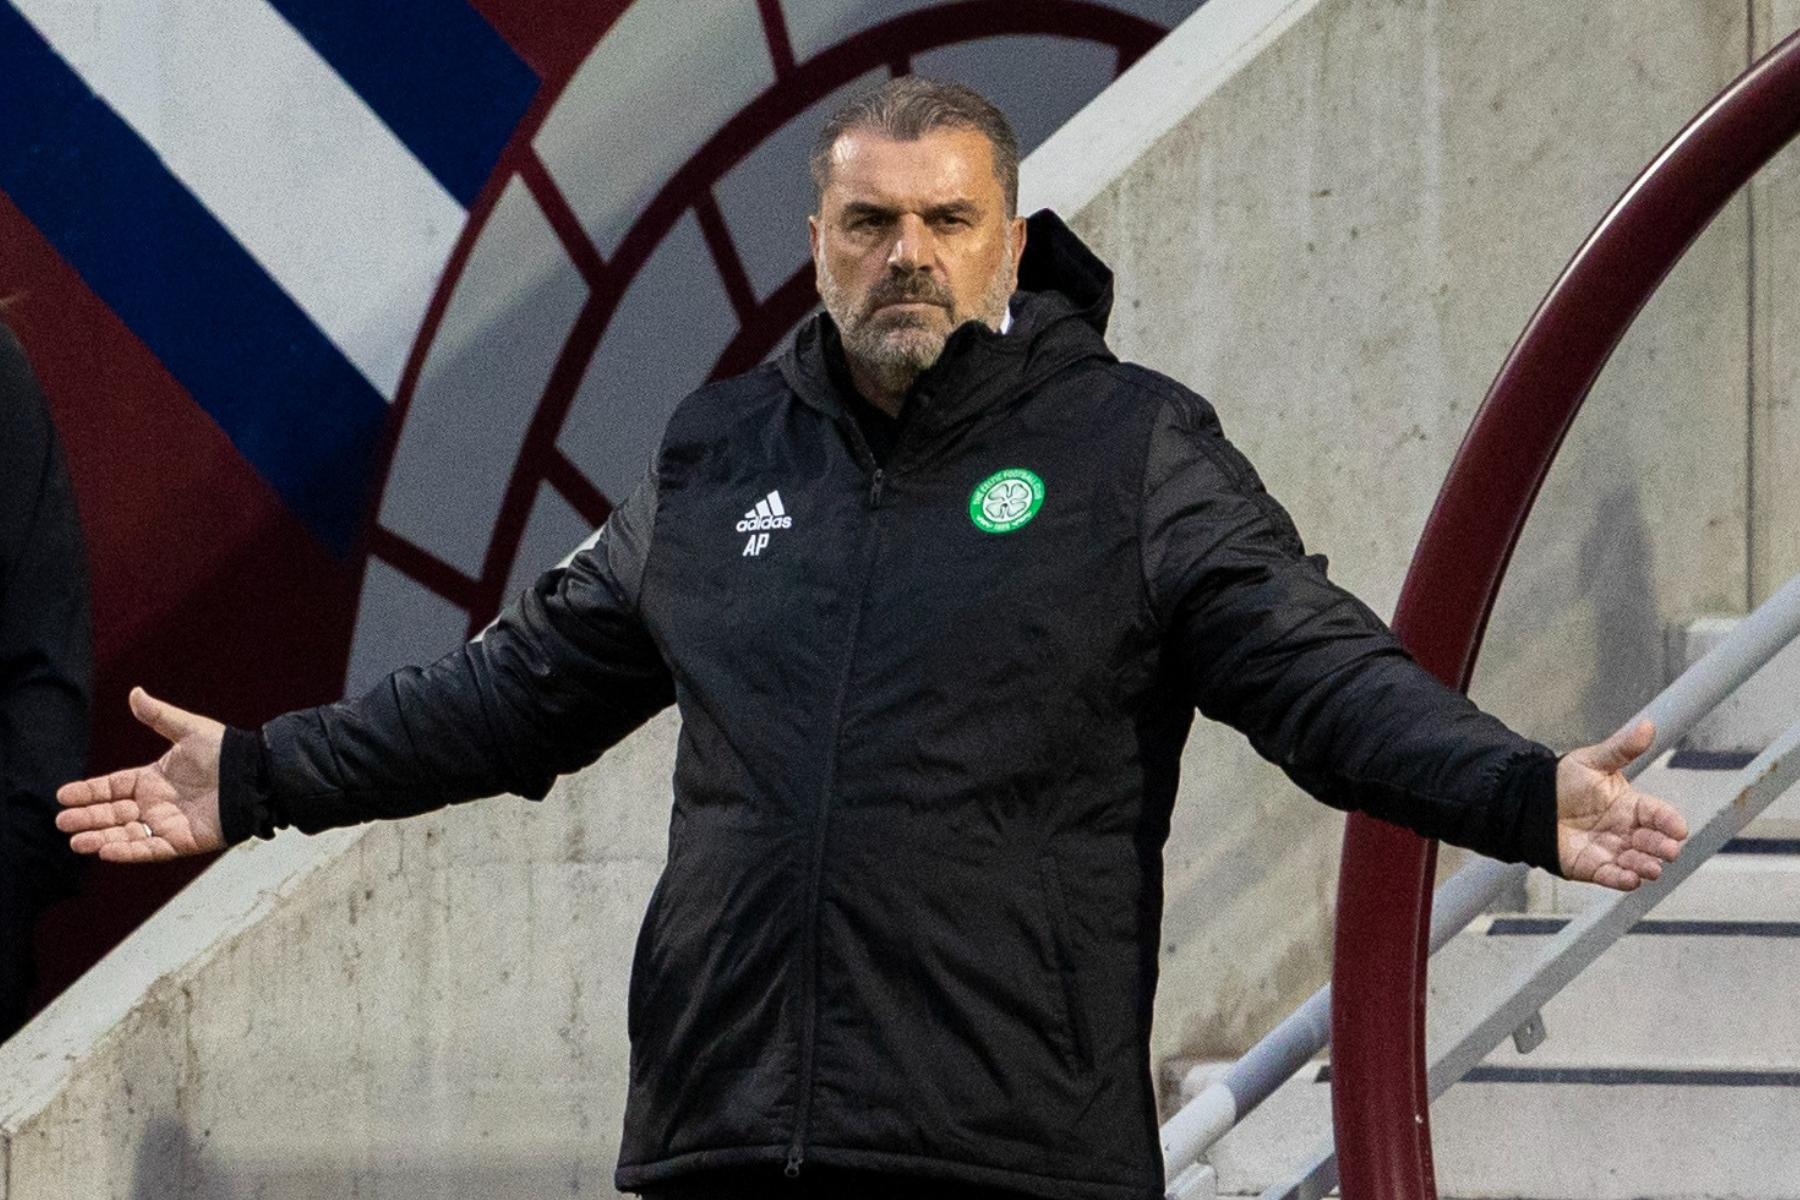 Celtic manager Ange Postecoglou shrugs off Hearts 'baptism of fire' ahead of return to Tynecastle